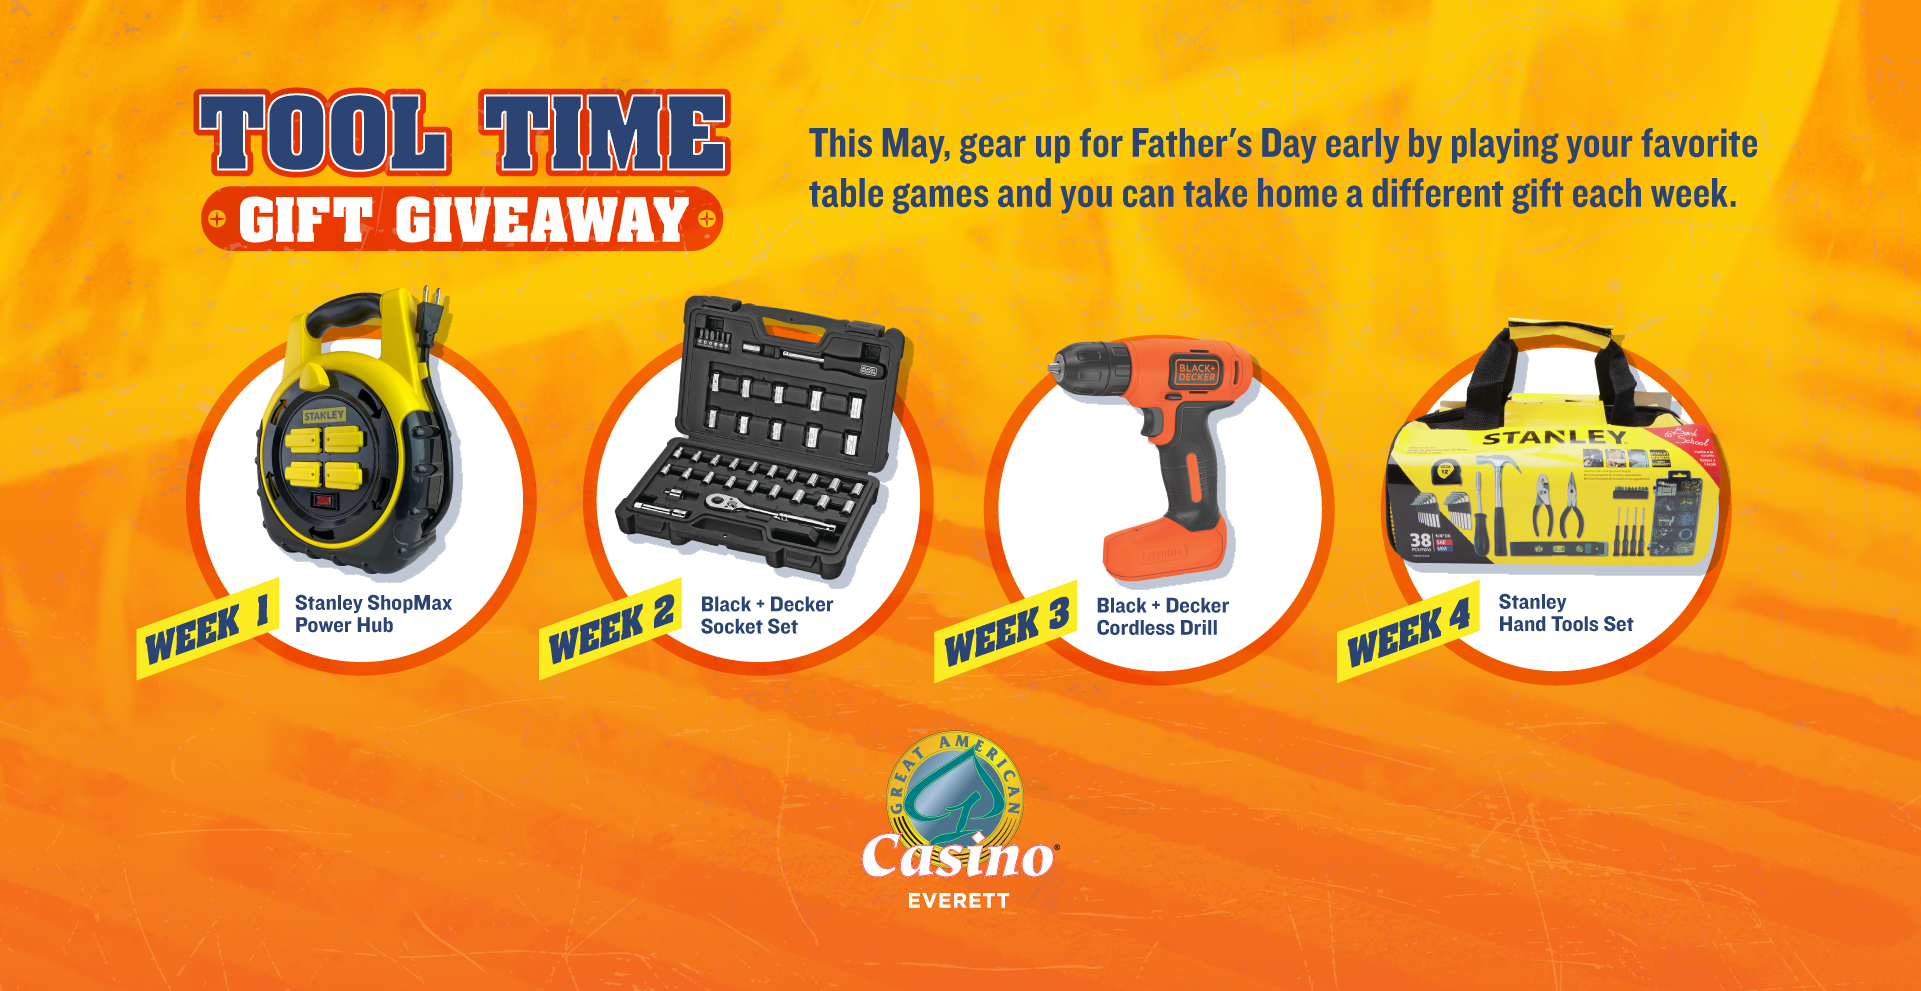 Great American Casino Everett | Tool Time Gift Giveaway